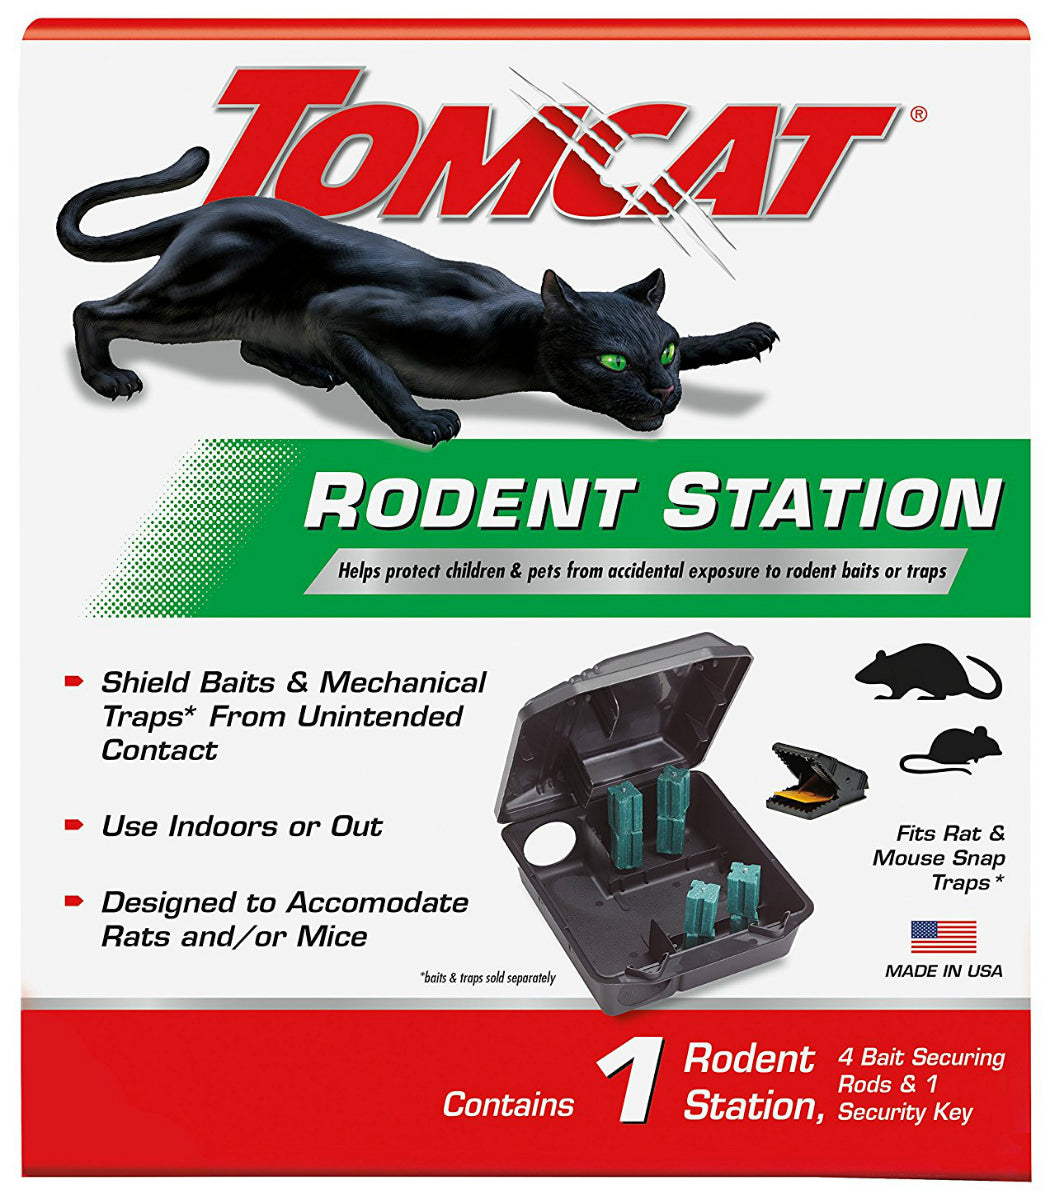 Tomcat 0363410 Rodent Station w/ 4 Bait Securing Rods & 1 Security